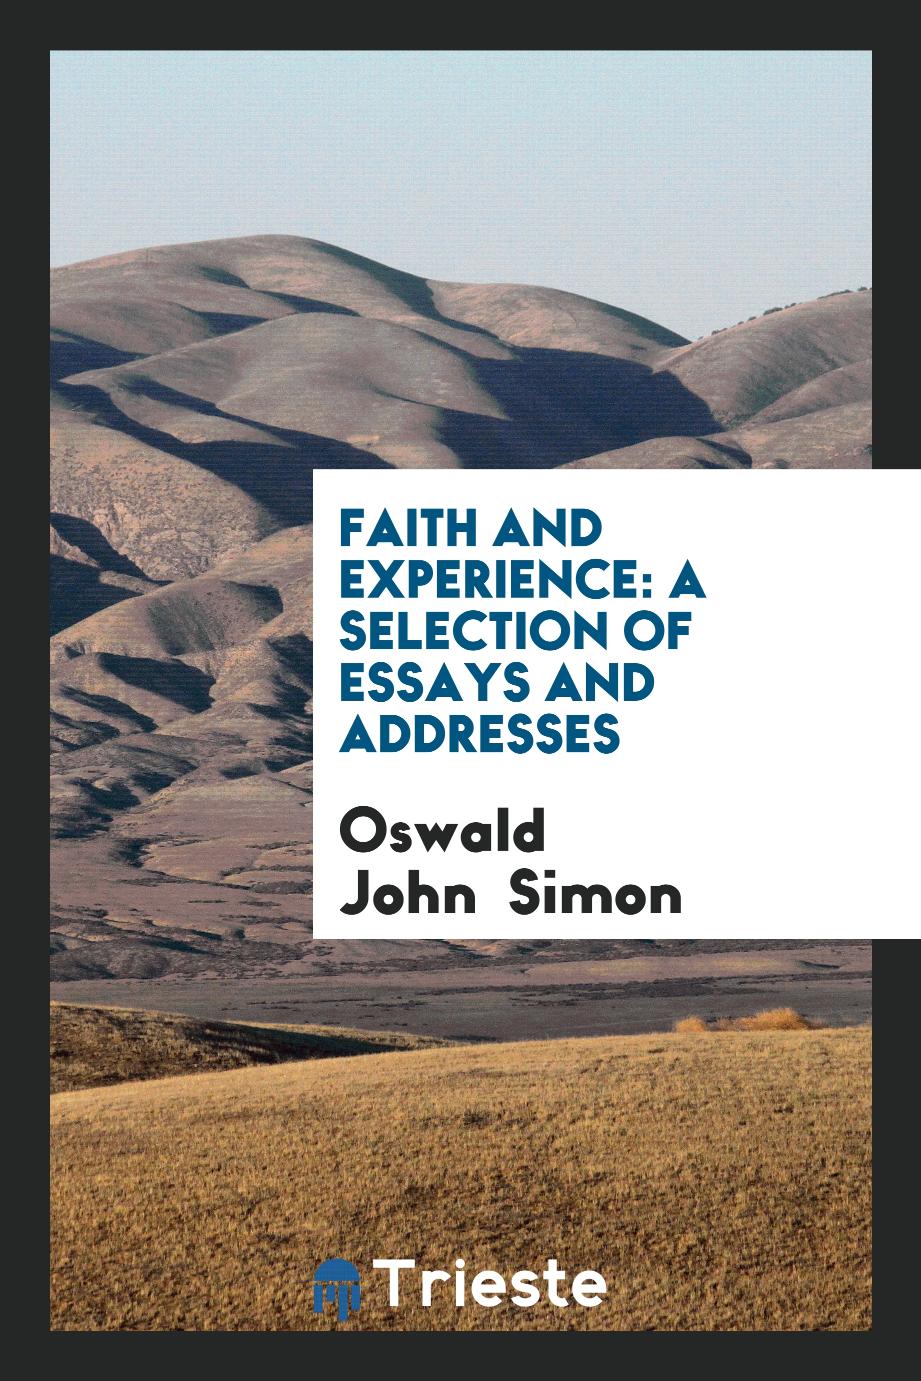 Faith and Experience: A Selection of Essays and Addresses